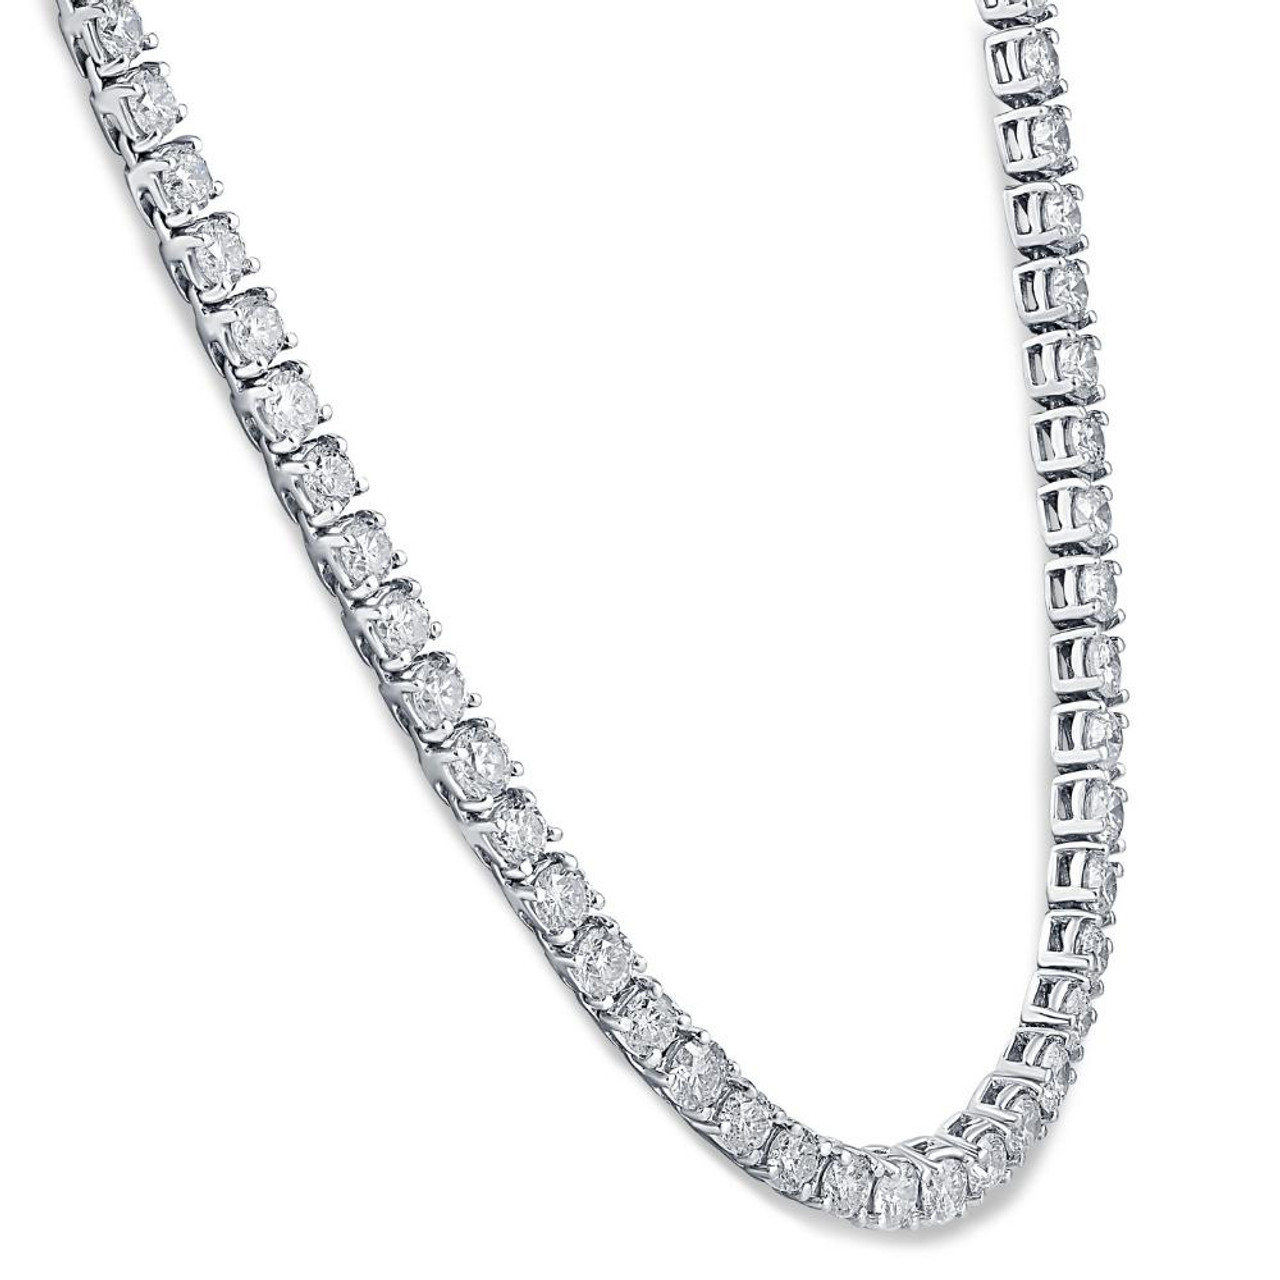 Baguette Shape Diamond Collar Style Necklace - Desires by Mikolay